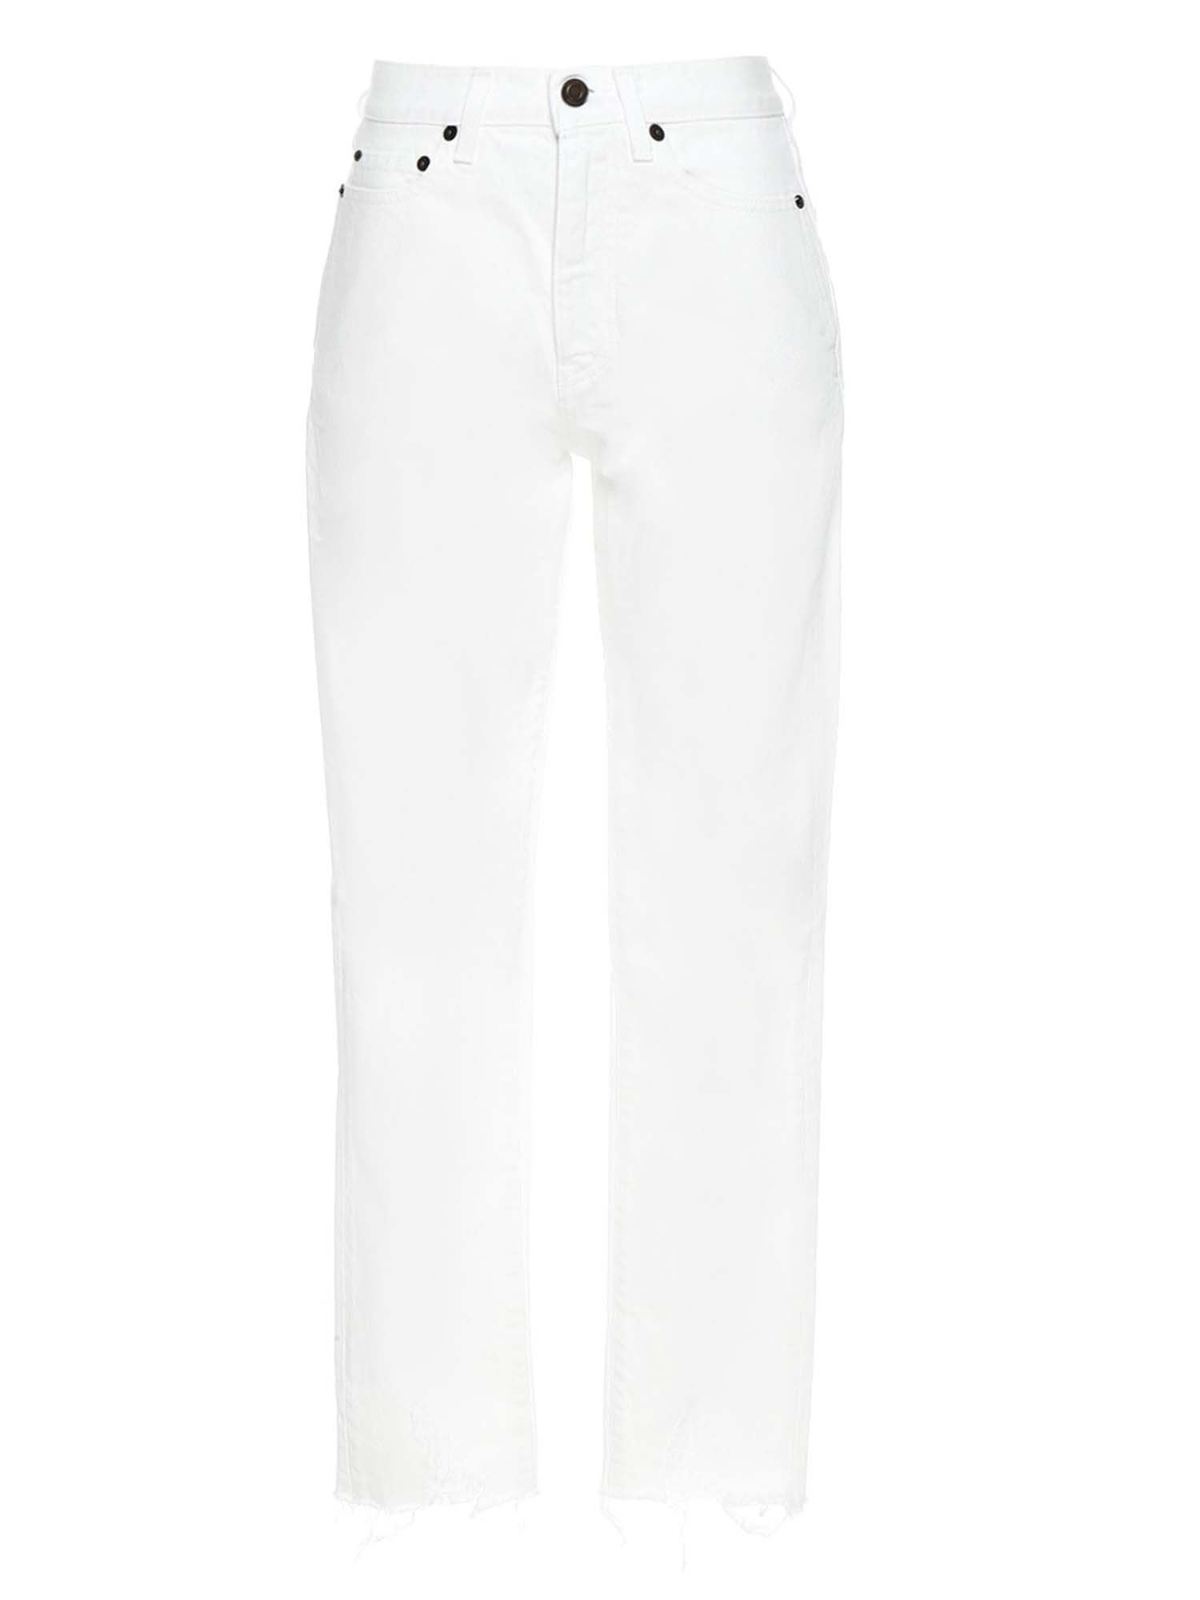 SAINT LAURENT CARROT FIT JEANS IN WHITE